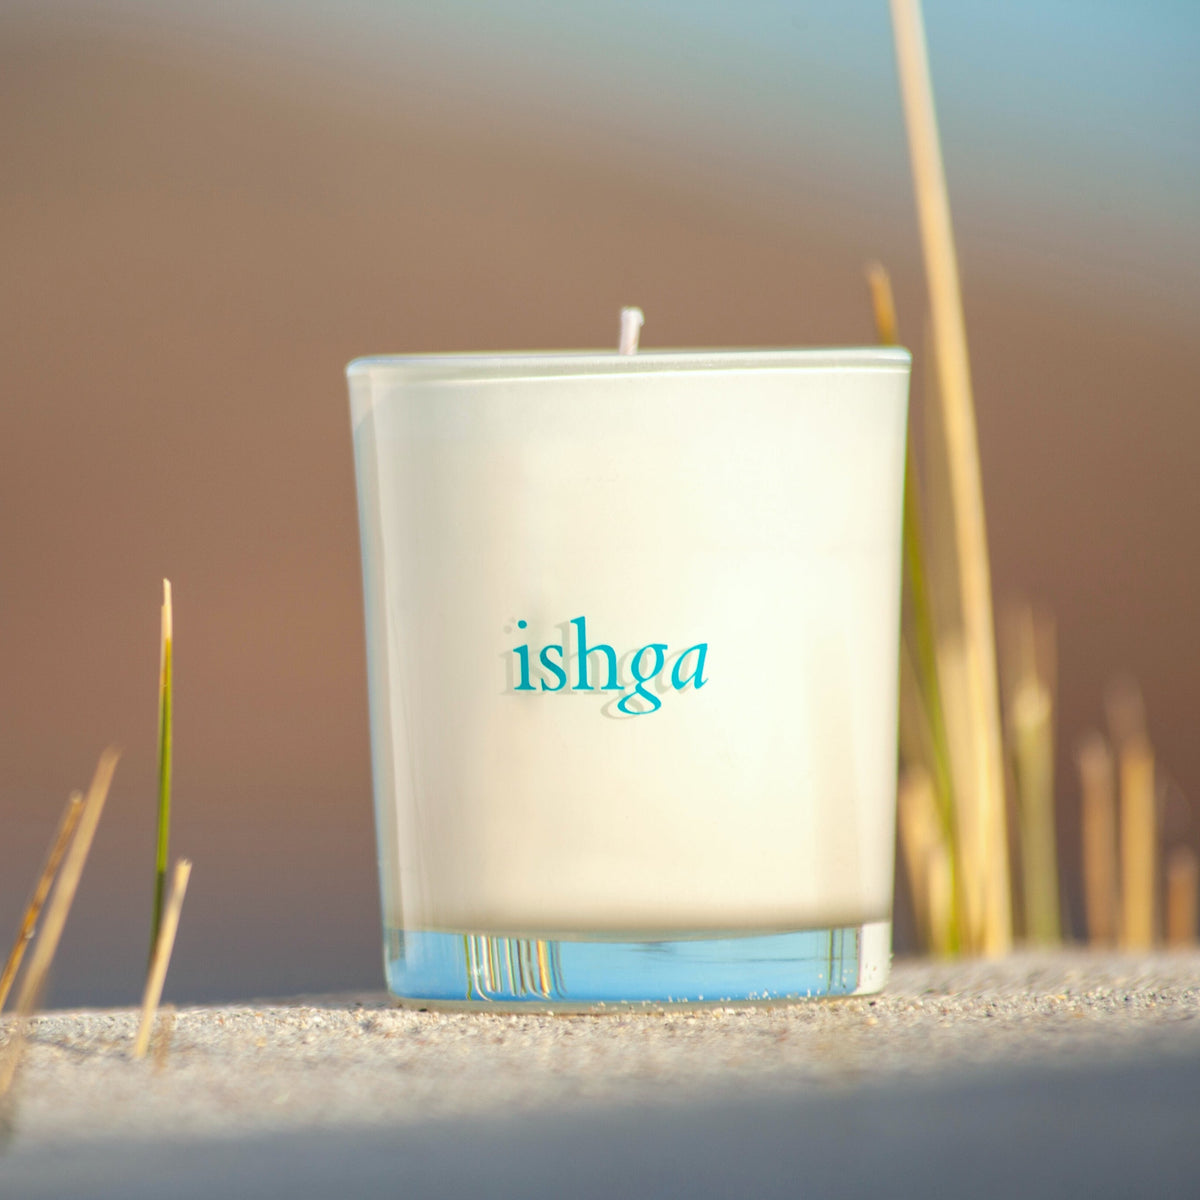 organic soya wax candle jar on beach with sand and grass reeds